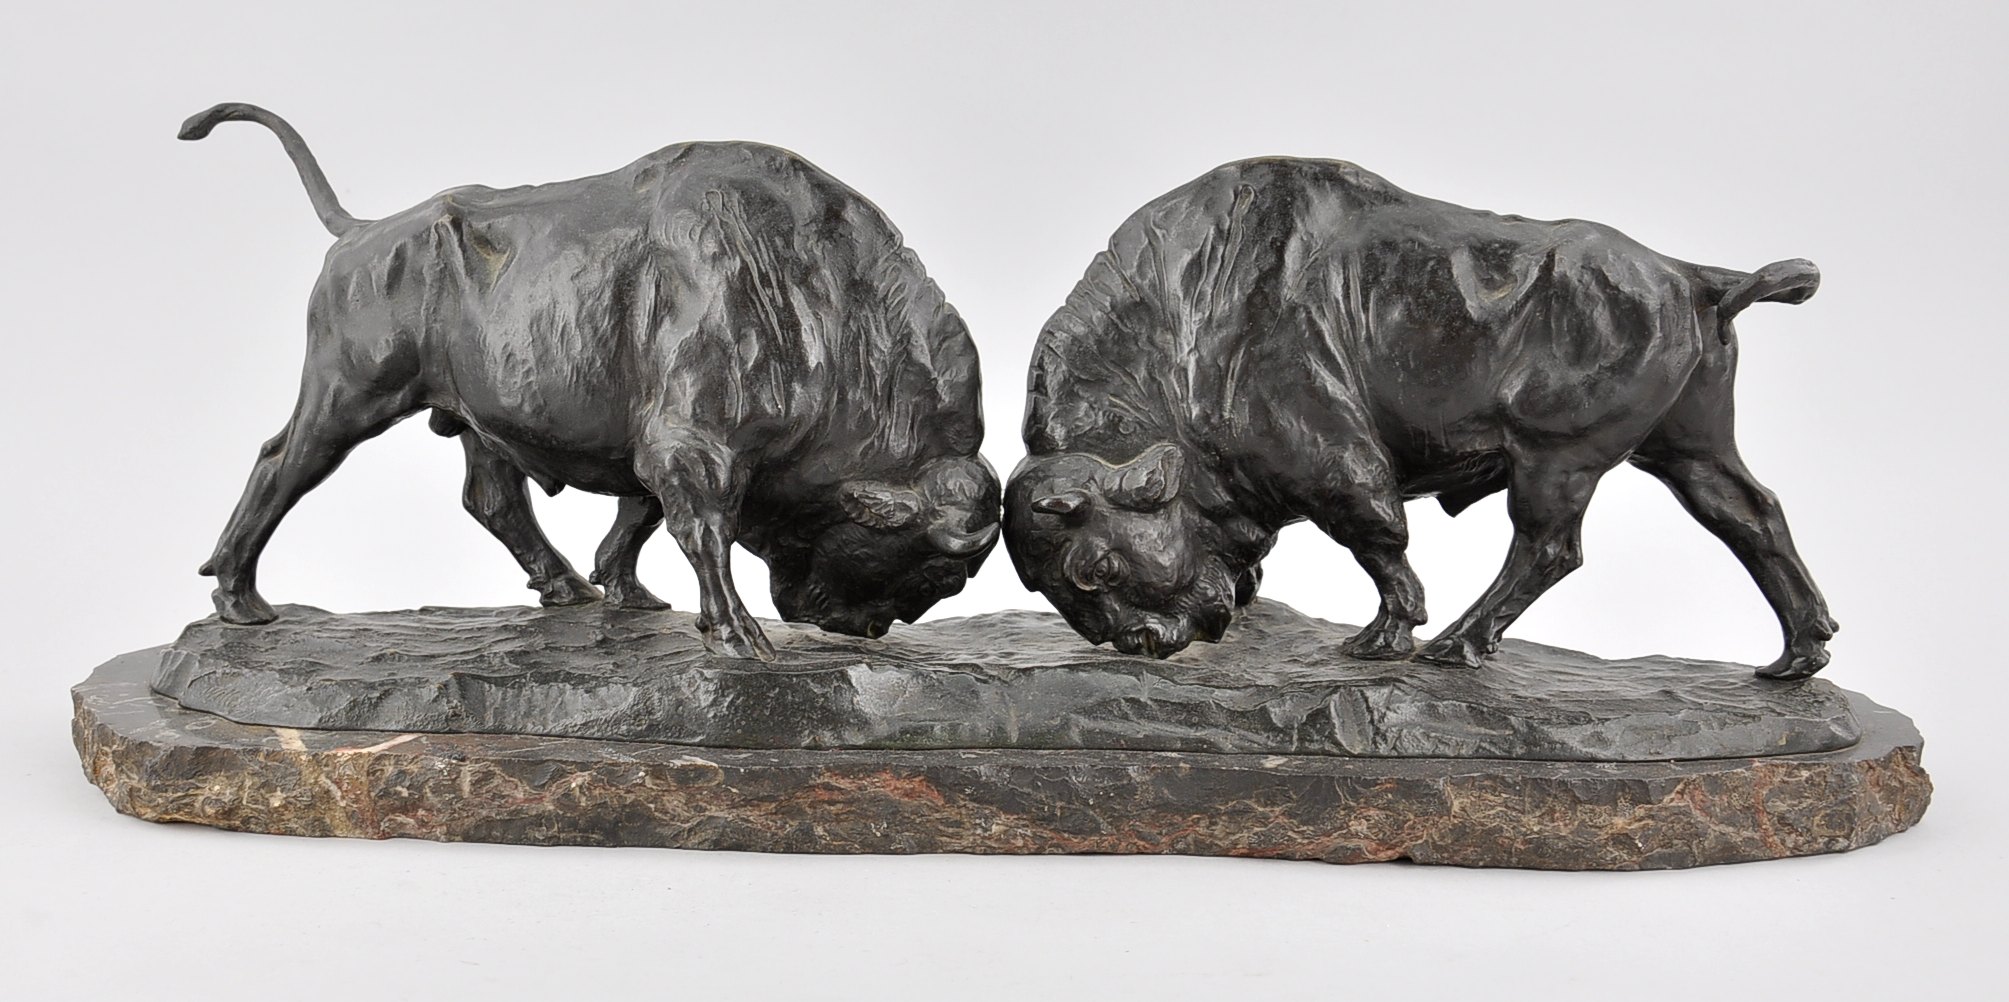 Bronze Statue of Two Fighting Bison, 05.20.10, Sold: $575